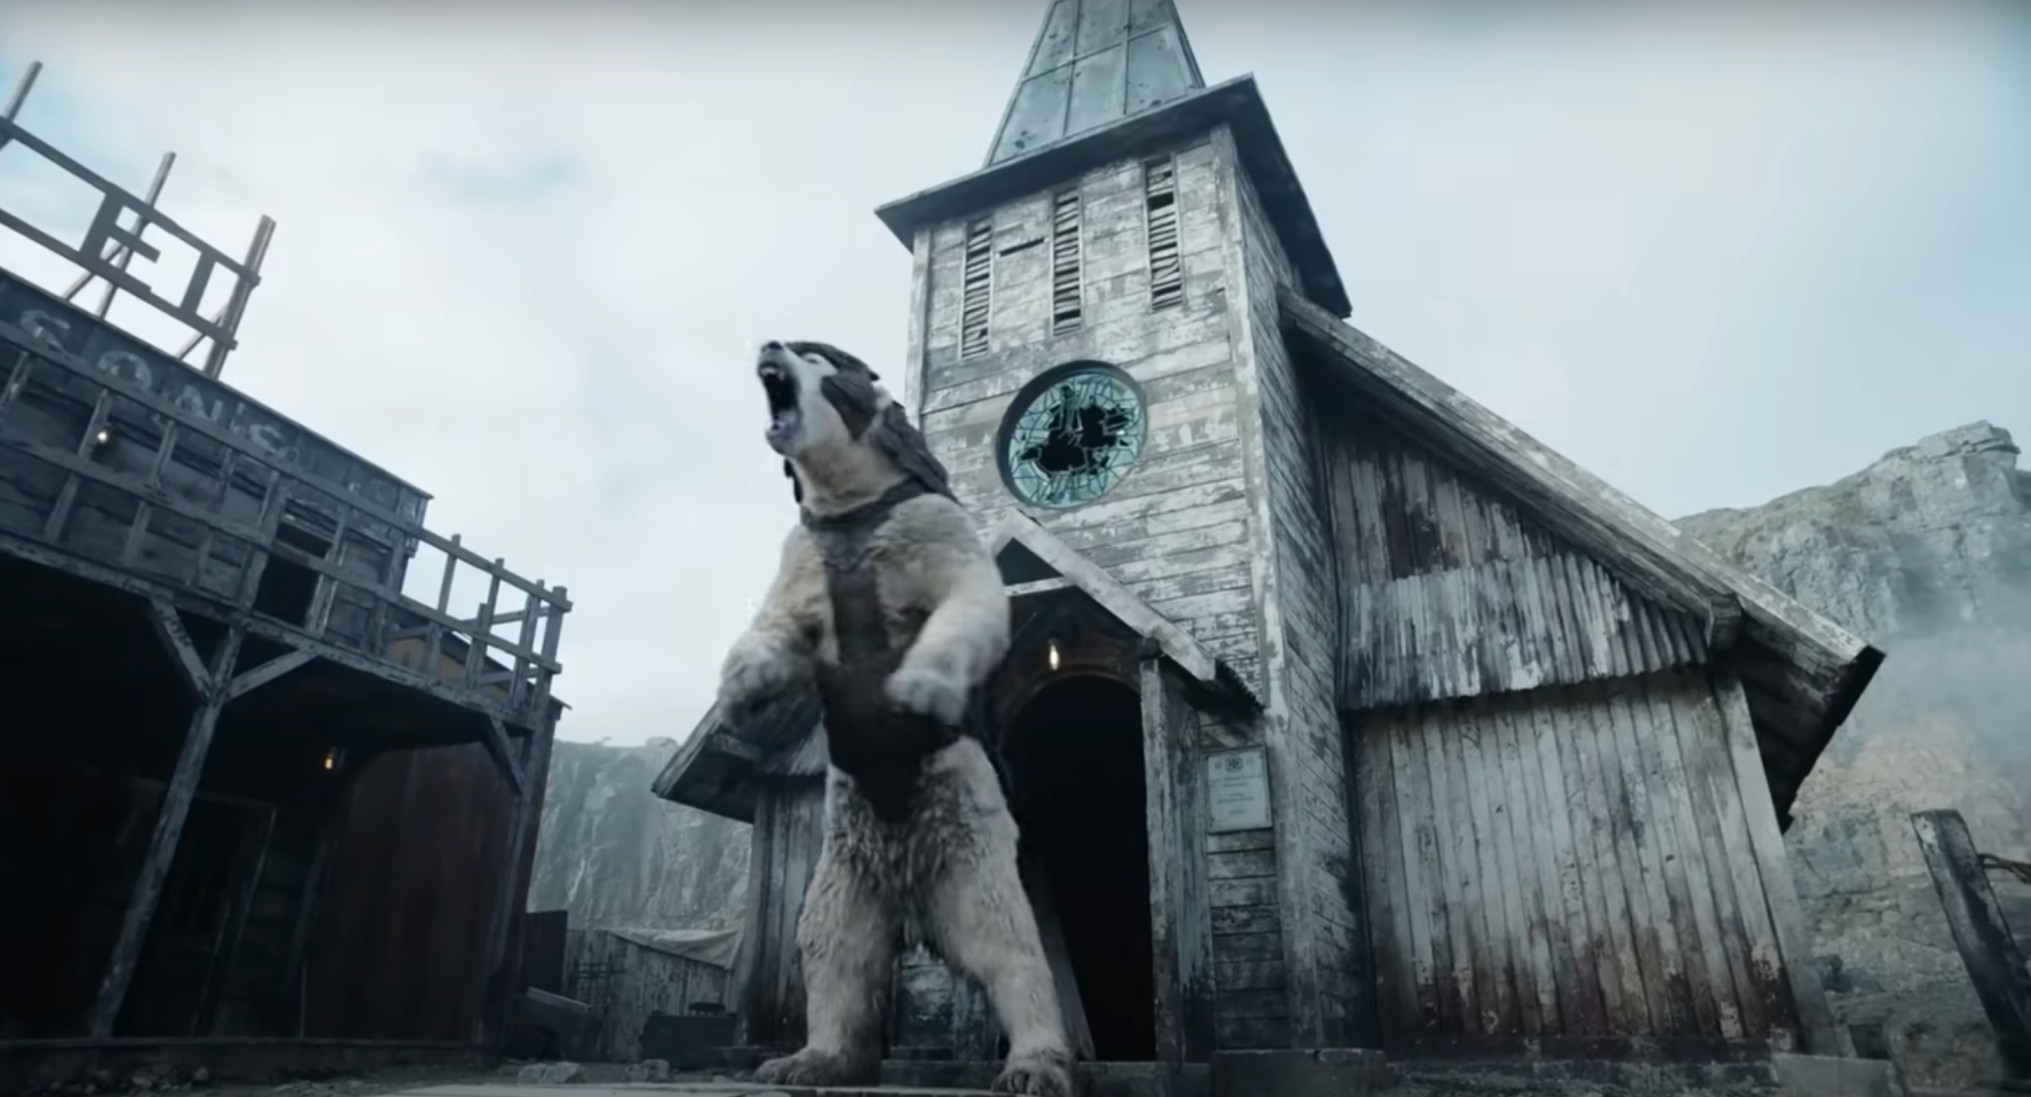 An armored polar bear stands in front of a dilapidated building with a circular emblem